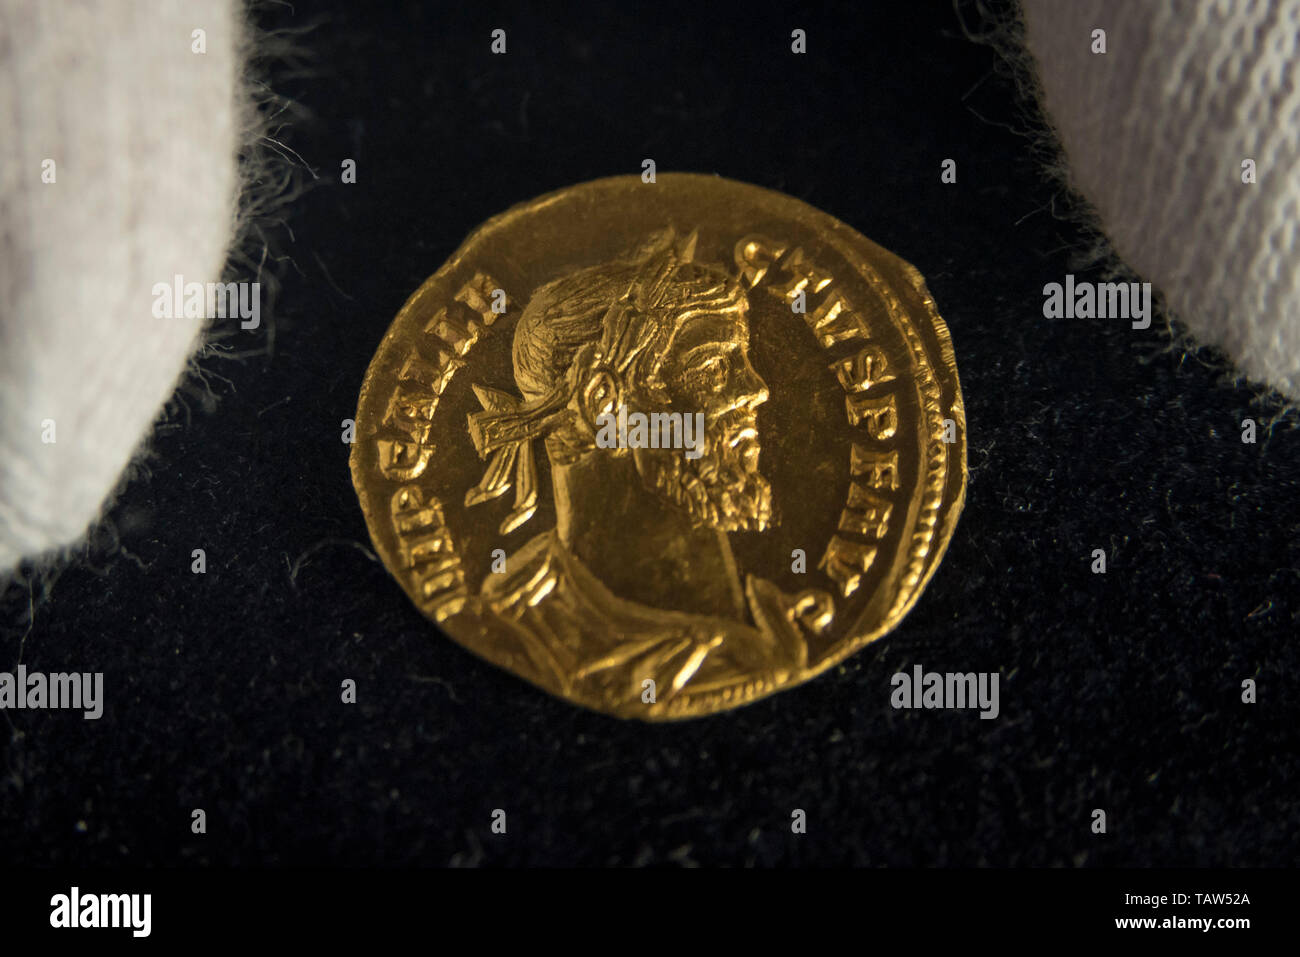 London, UK.  28 May 2019. A rare Aureus - a gold coin of ancient Rome, 4.31grams in weight and about the diameter of  modern day 1 penny presented at a photocall in Mayfair at Dix Noonan Webb, international coin specialists, ahead of its auction on 6 June 2019 with an estimate at £70,000-100,000.  The coin, dating from AD 293-296, was found by a 30-year-old metal detectorist in March 2019 in a newly ploughed field in Kent, and is one of only twenty-four Aurei of Allectus known with nineteen different obverse dies recorded.  Credit: Stephen Chung / Alamy Live News Stock Photo